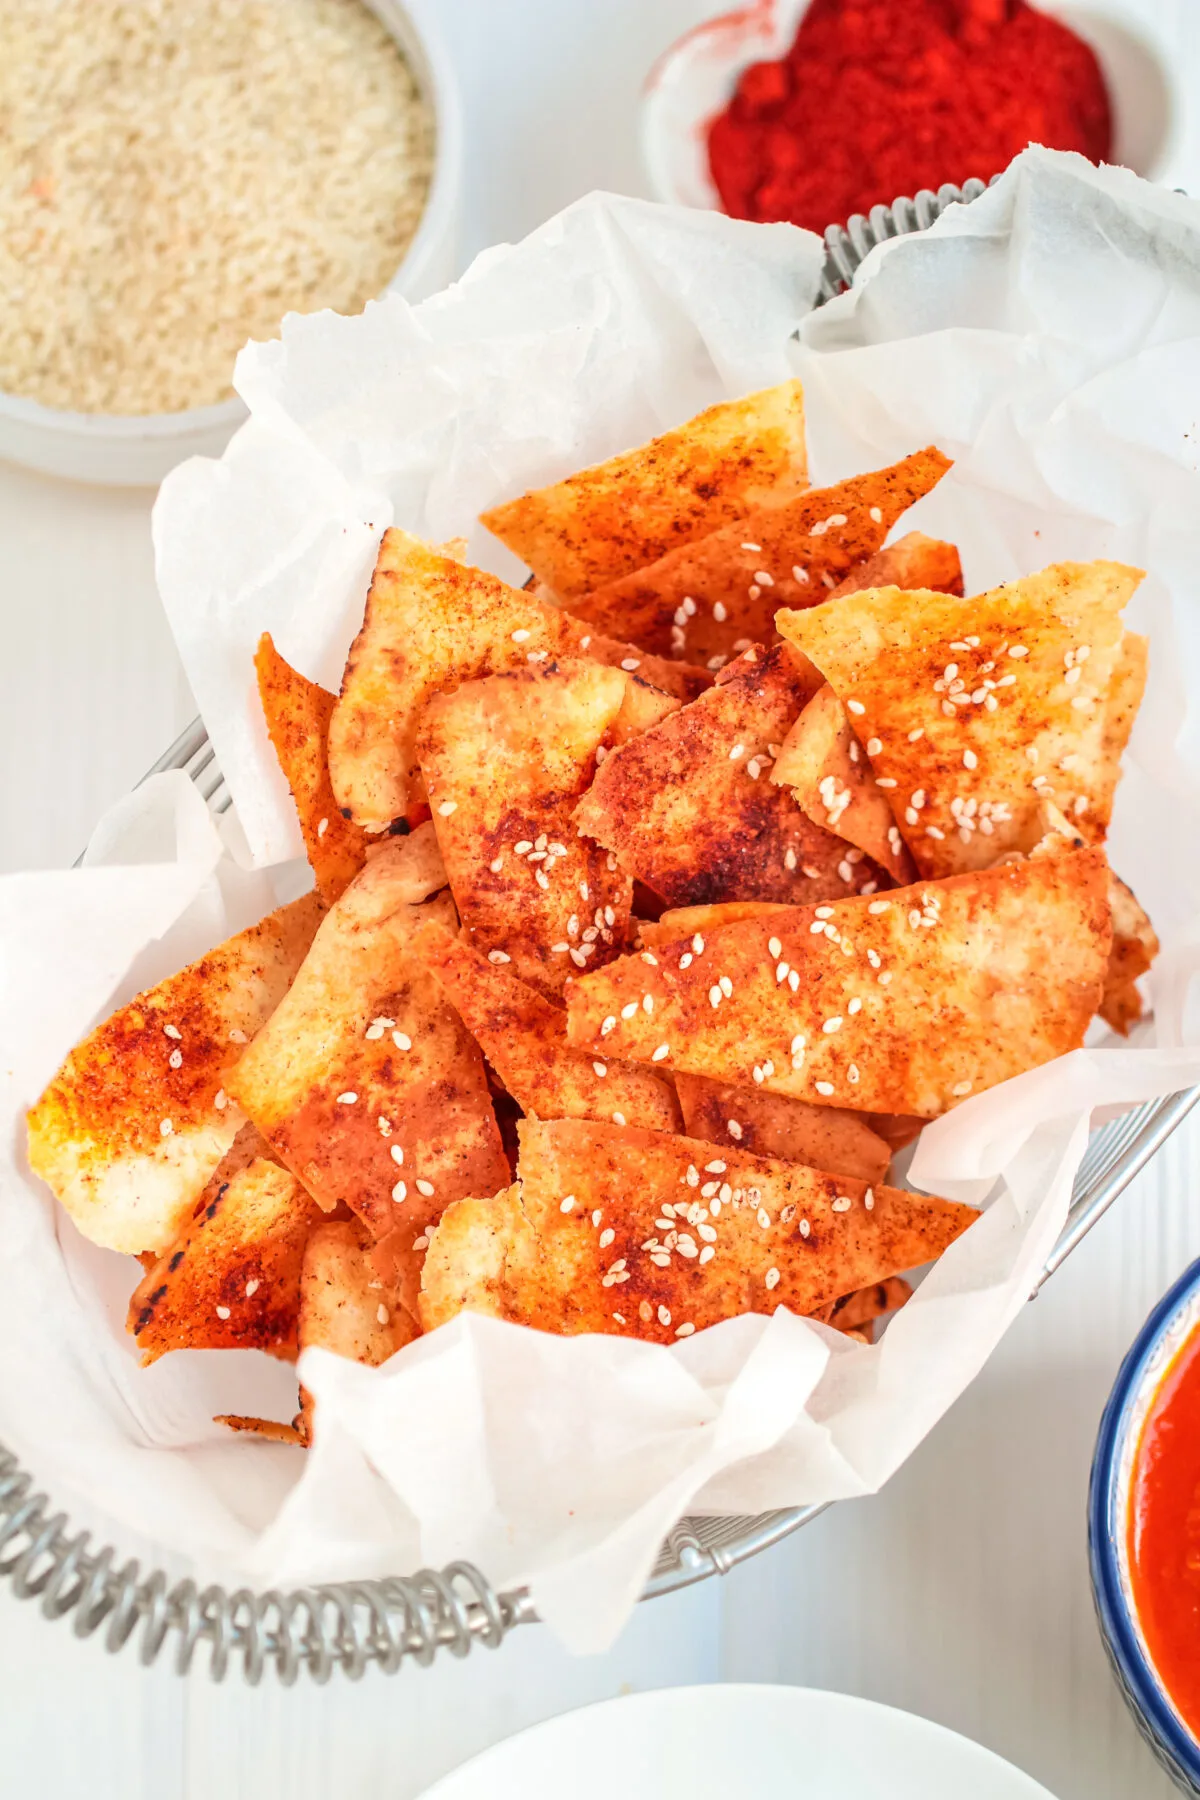 Looking for a delicious and easy pita chip recipe? Look no further than these homemade smoked paprika pita chips with sesame seeds!